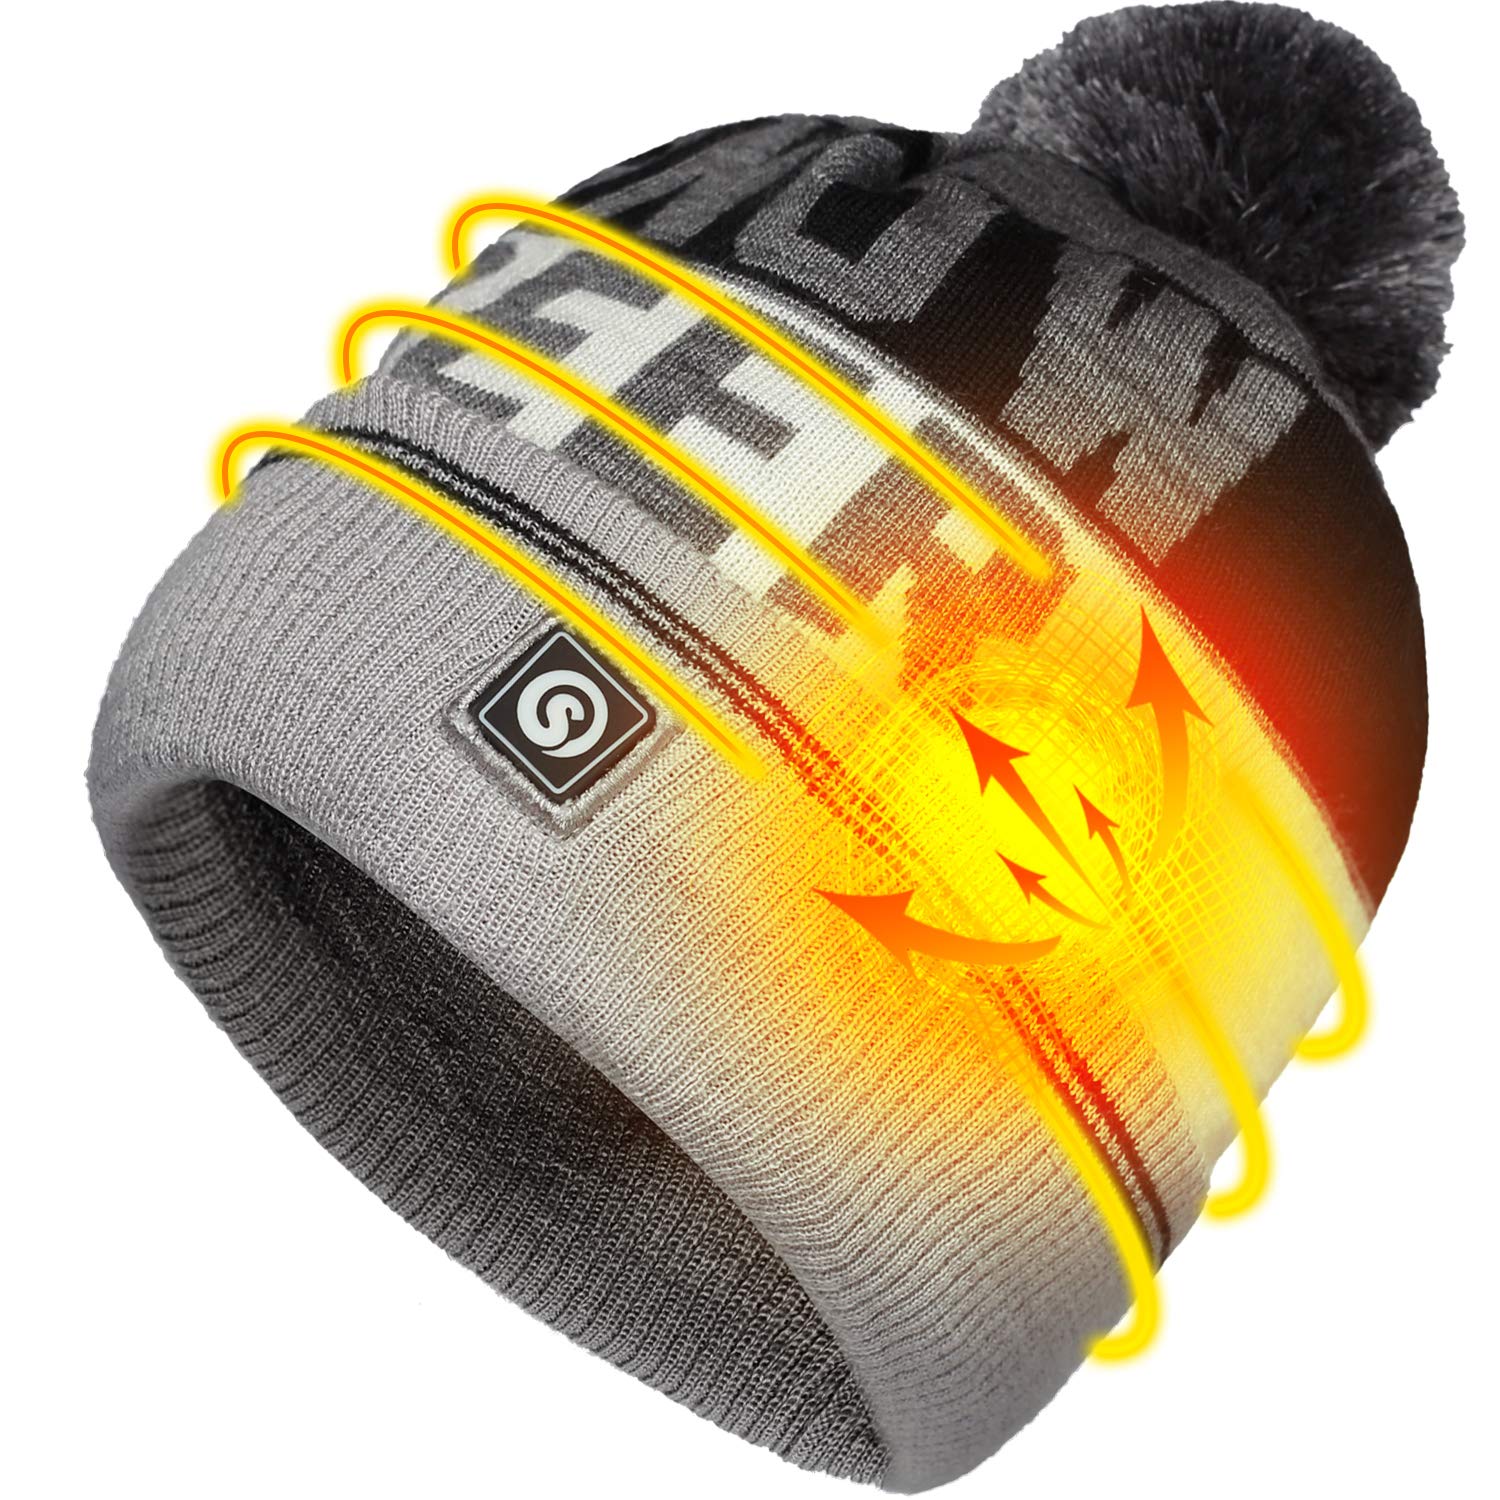 Heated Hat - Electric Battery Heated Beanie Hats For Men Women,7.4V Rechargeable Winter Heated Hat Cap